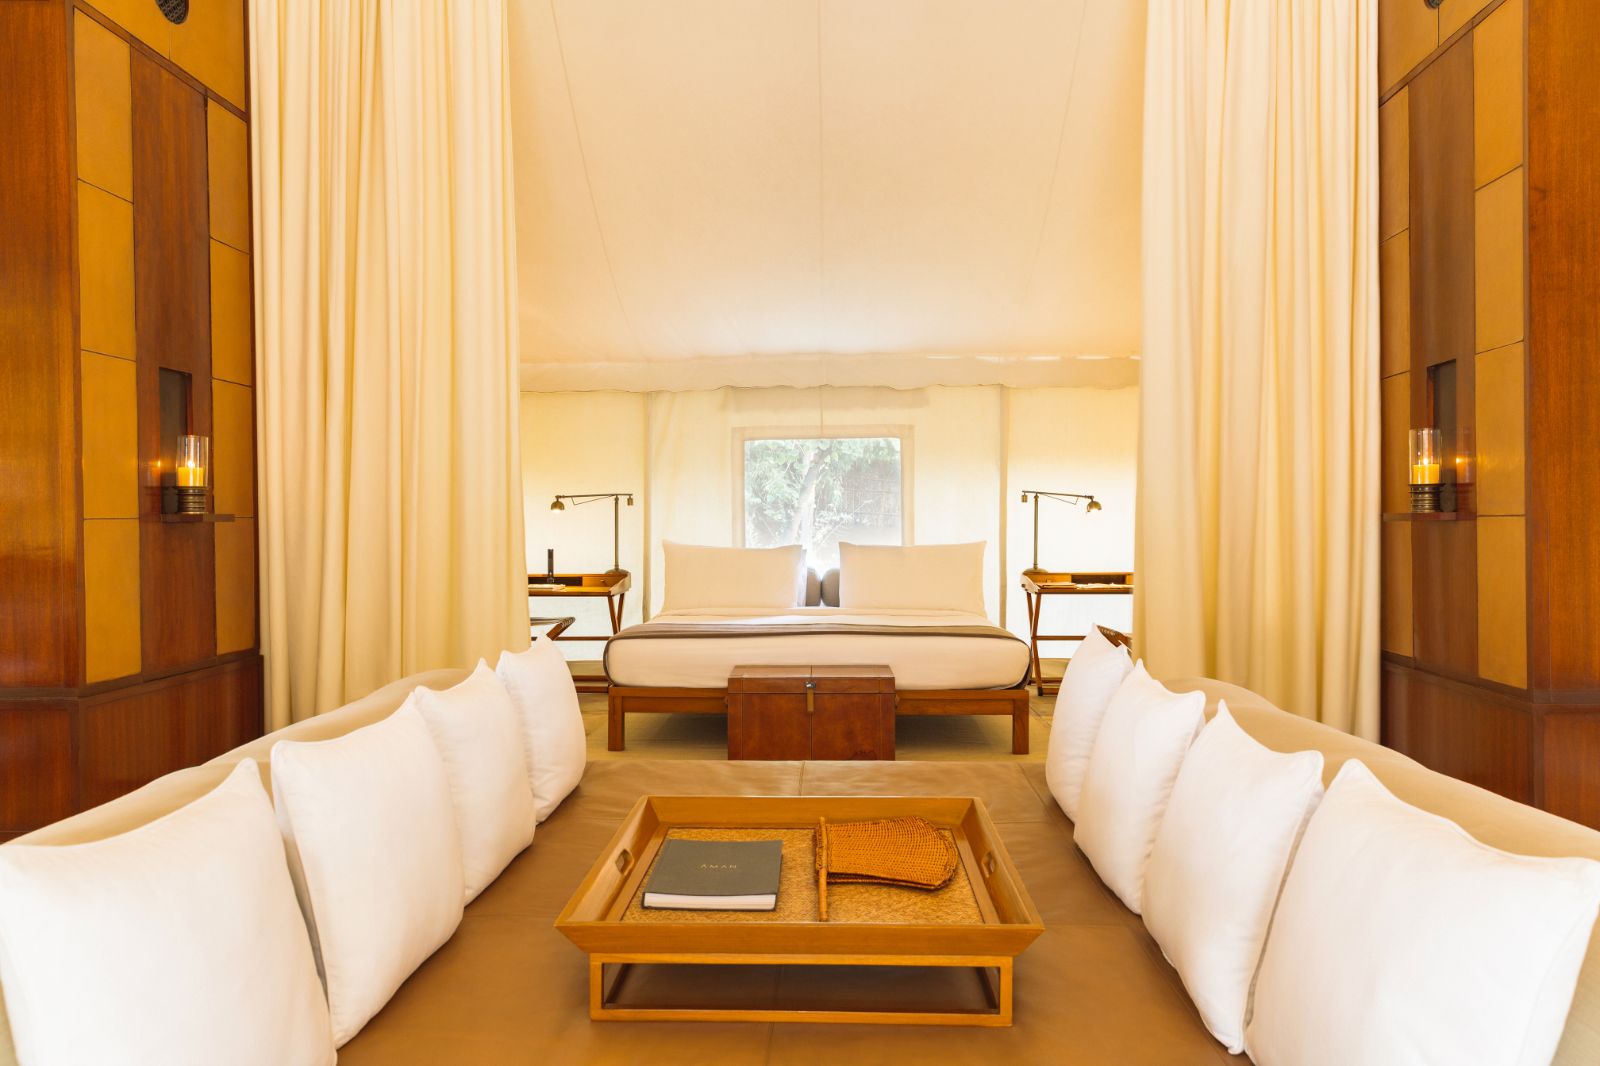 Interior of guest tent at Aman-I-Khas by Ranthambore National Park in India